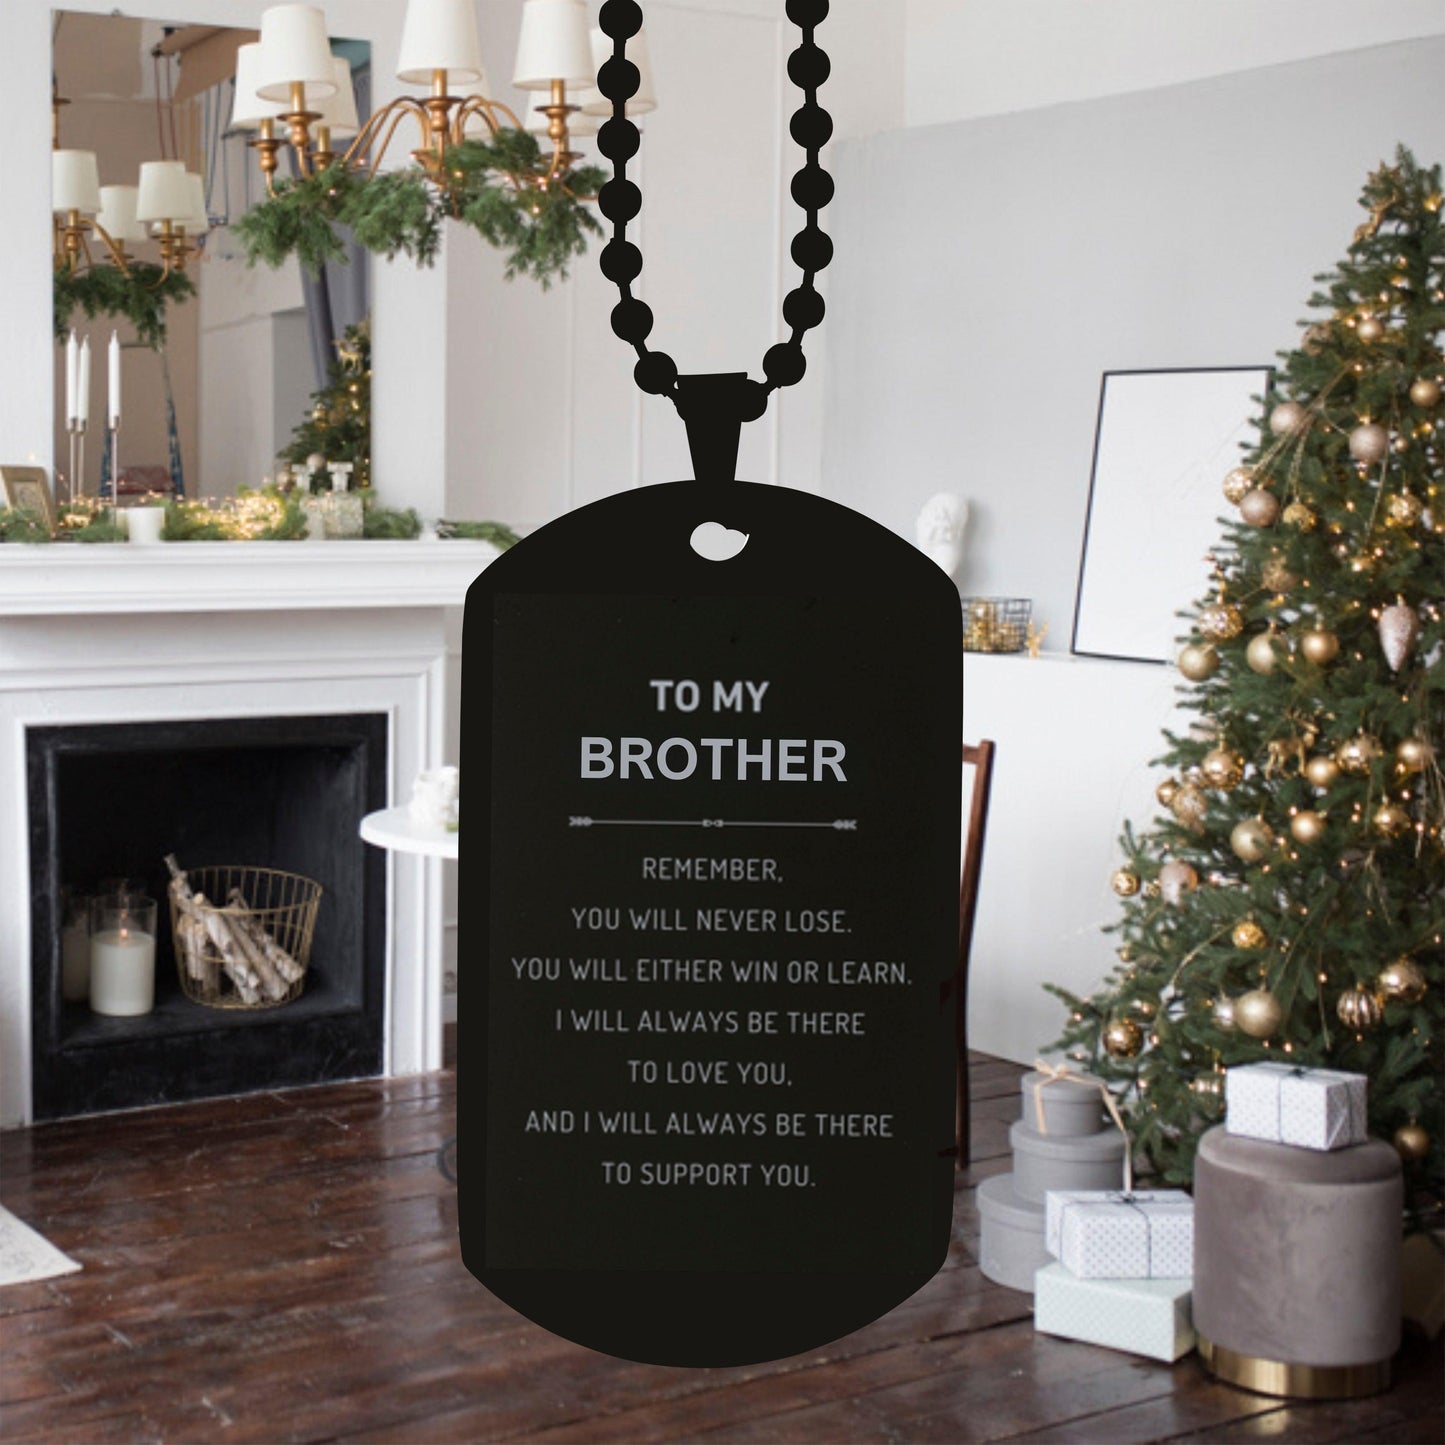 Brother Gifts, To My Brother Remember, you will never lose. You will either WIN or LEARN, Keepsake Black Dog Tag For Brother Engraved, Birthday Christmas Gifts Ideas For Brother X-mas Gifts - Mallard Moon Gift Shop